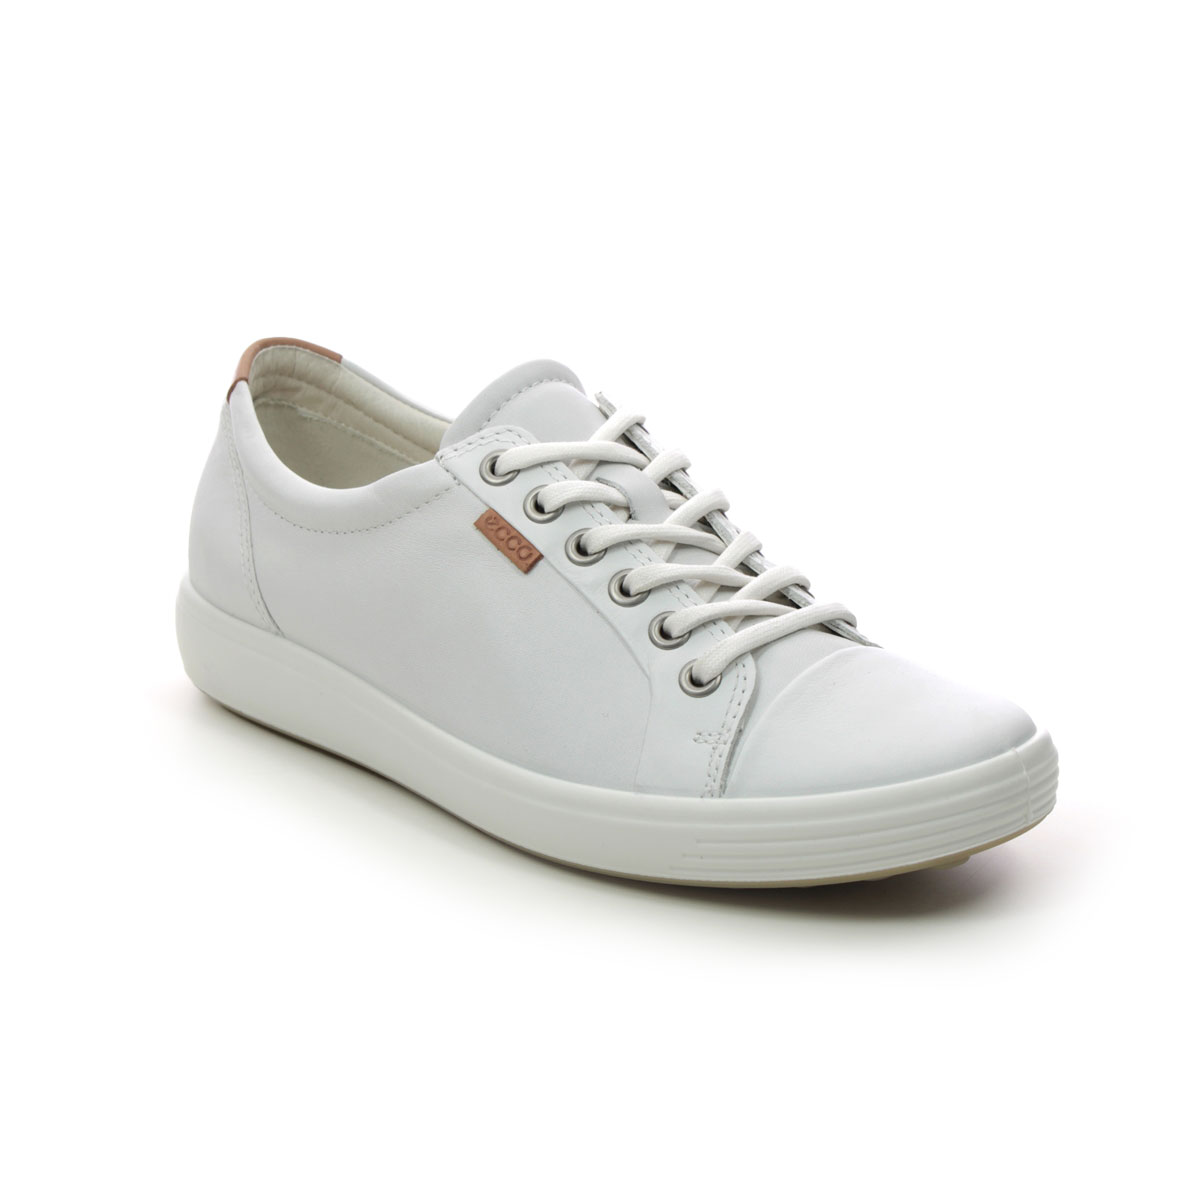 Ecco Soft 7 Lace White Leather Womens Trainers 430003-01007 In Size 41 In Plain White Leather